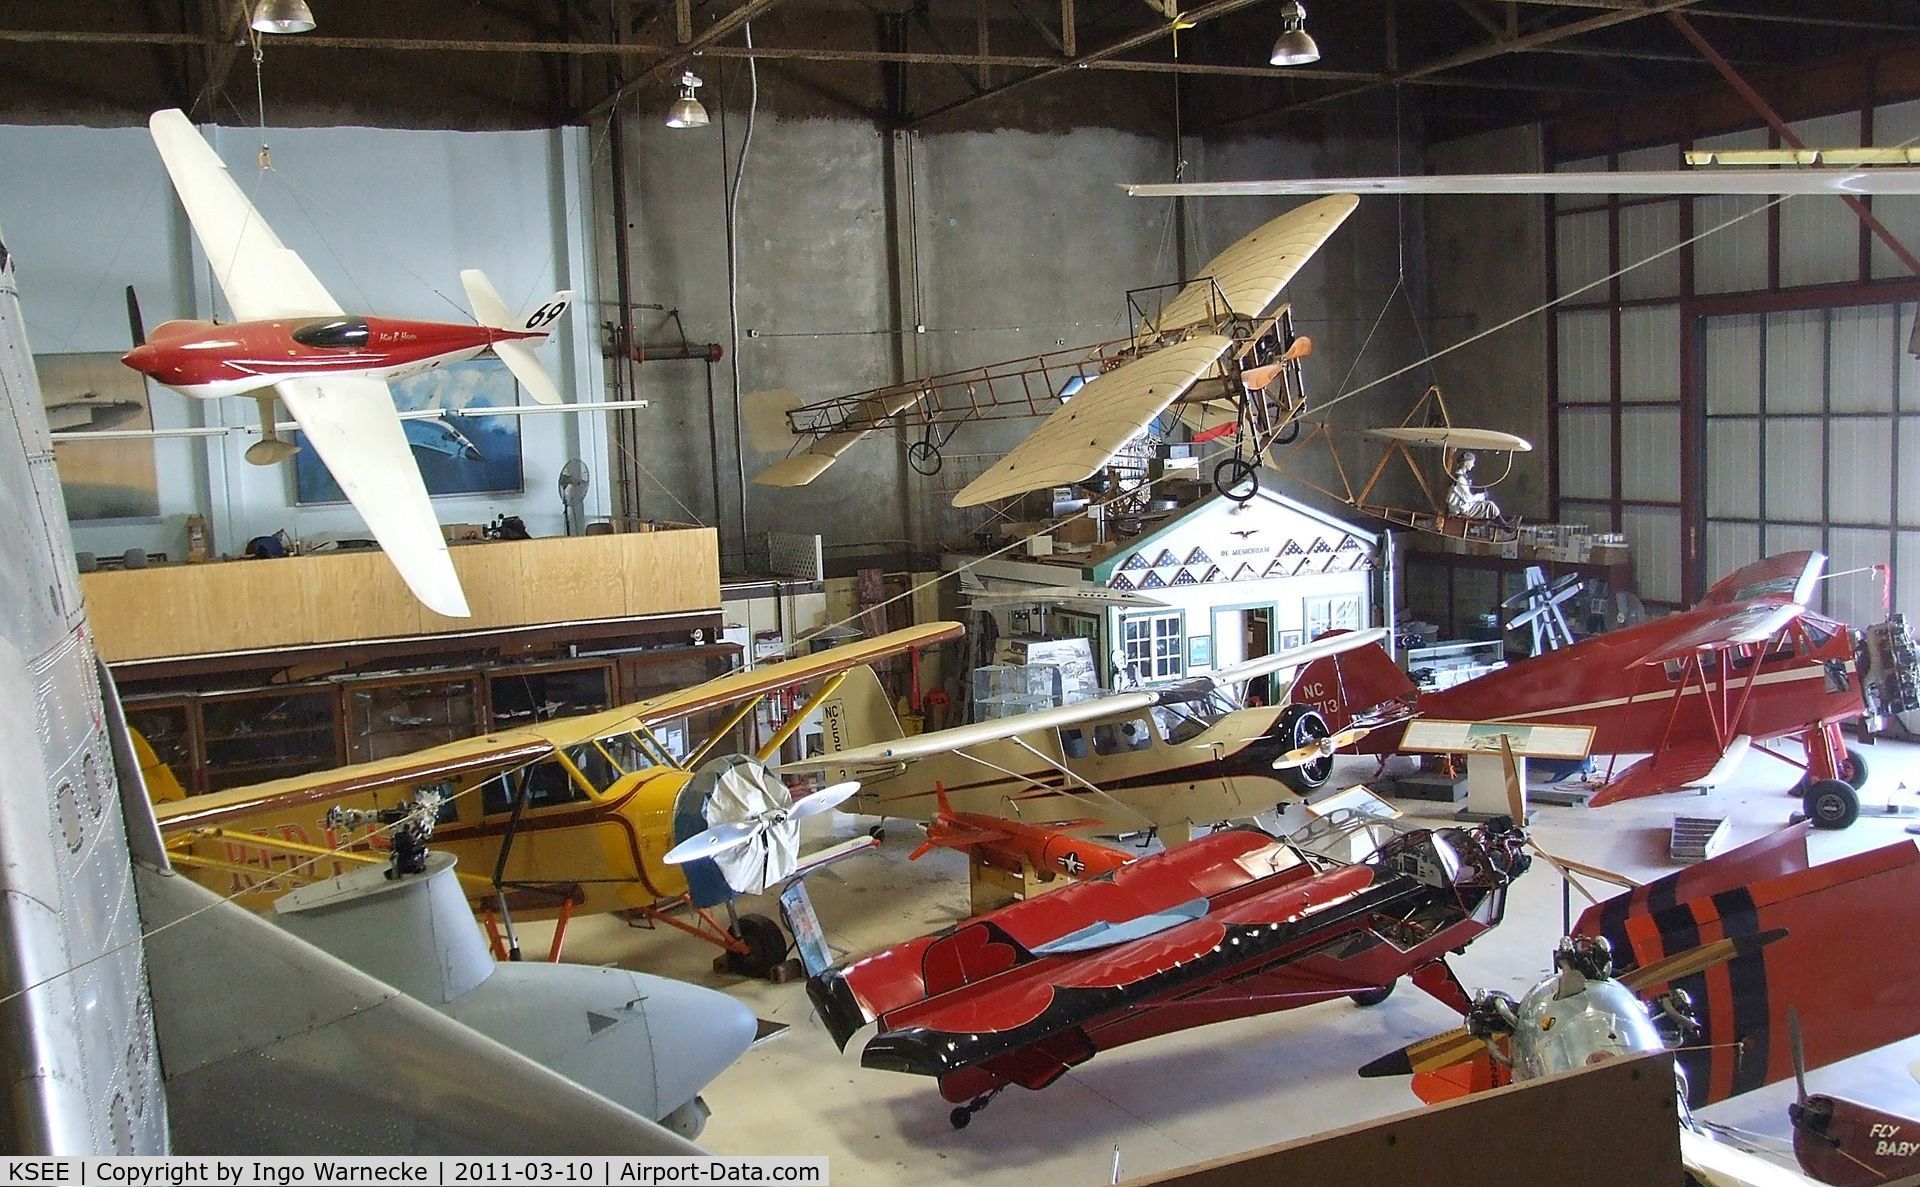 Gillespie Field Airport (SEE) - Inside the hangar of the San Diego Air & Space Museum's Annex